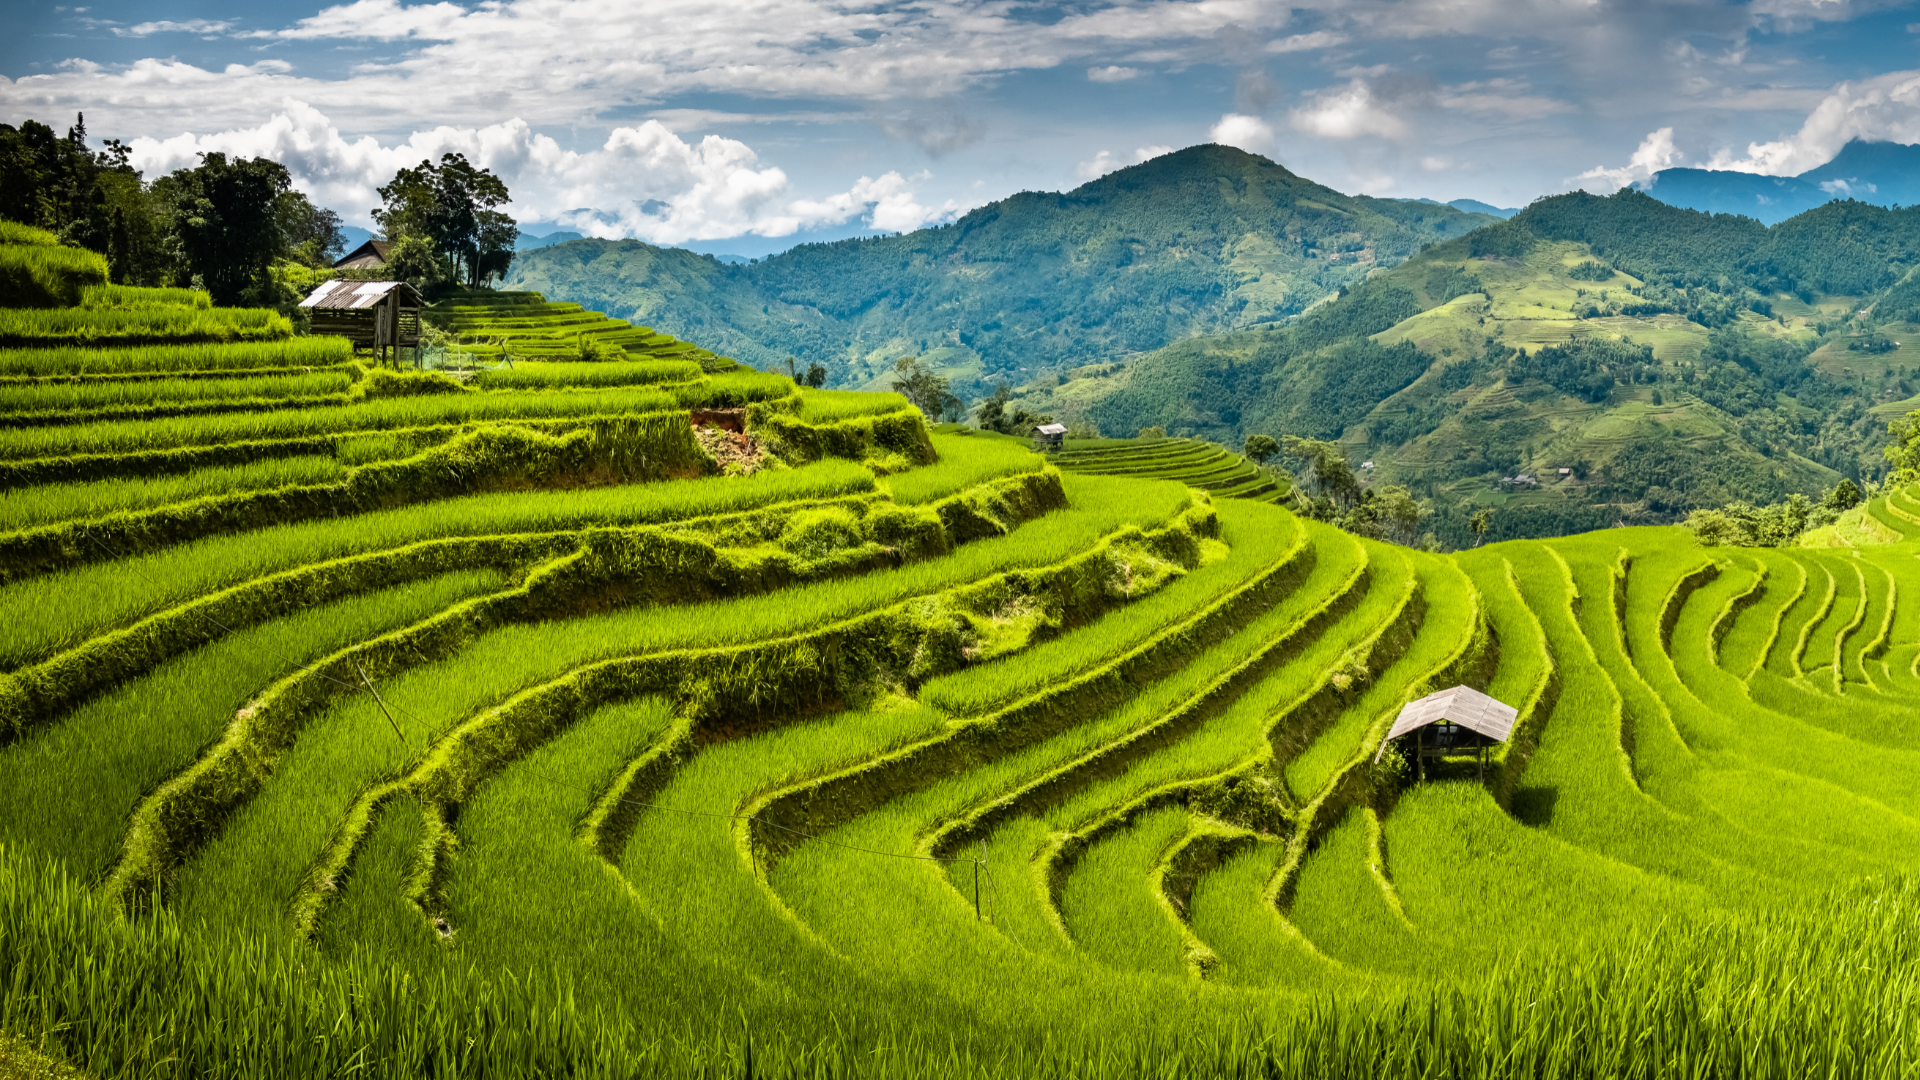 Lush rice field in mountains